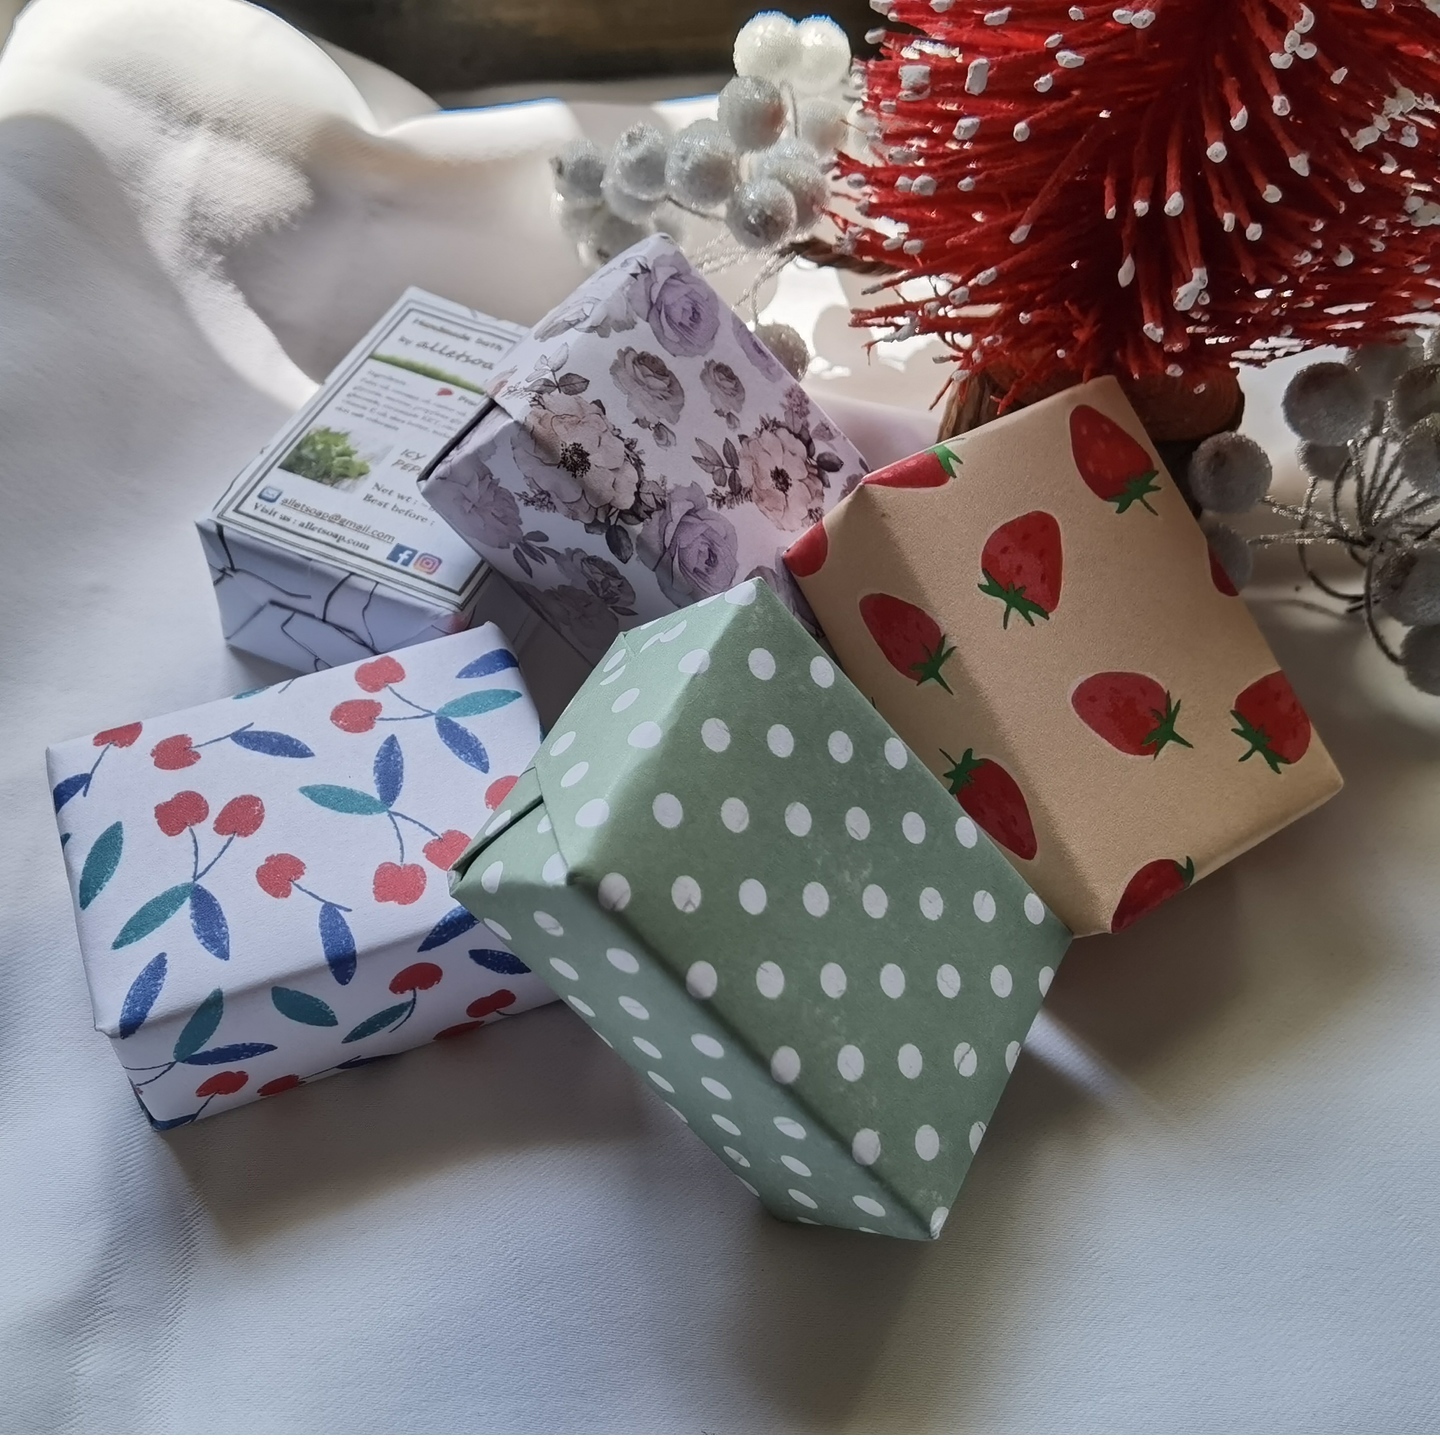 Bundle of 5 Hand Soaps in Floral  Pattern Paper Wrapped